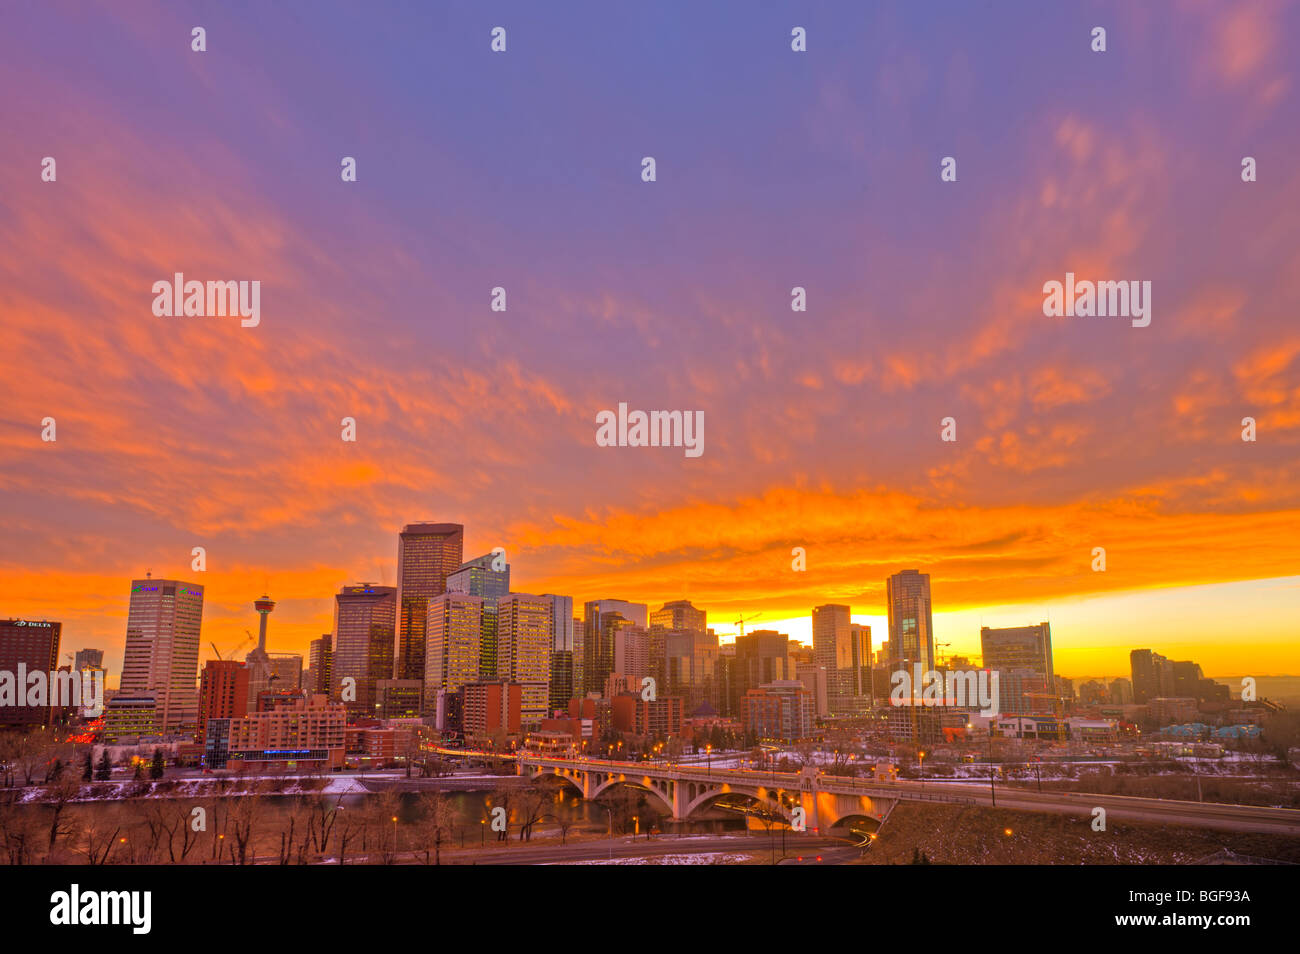 Calgary skyline of high-rise buildings, the Calgary Tower, and the Centre Street Bridge spanning the Bow River at sunset after l Stock Photo